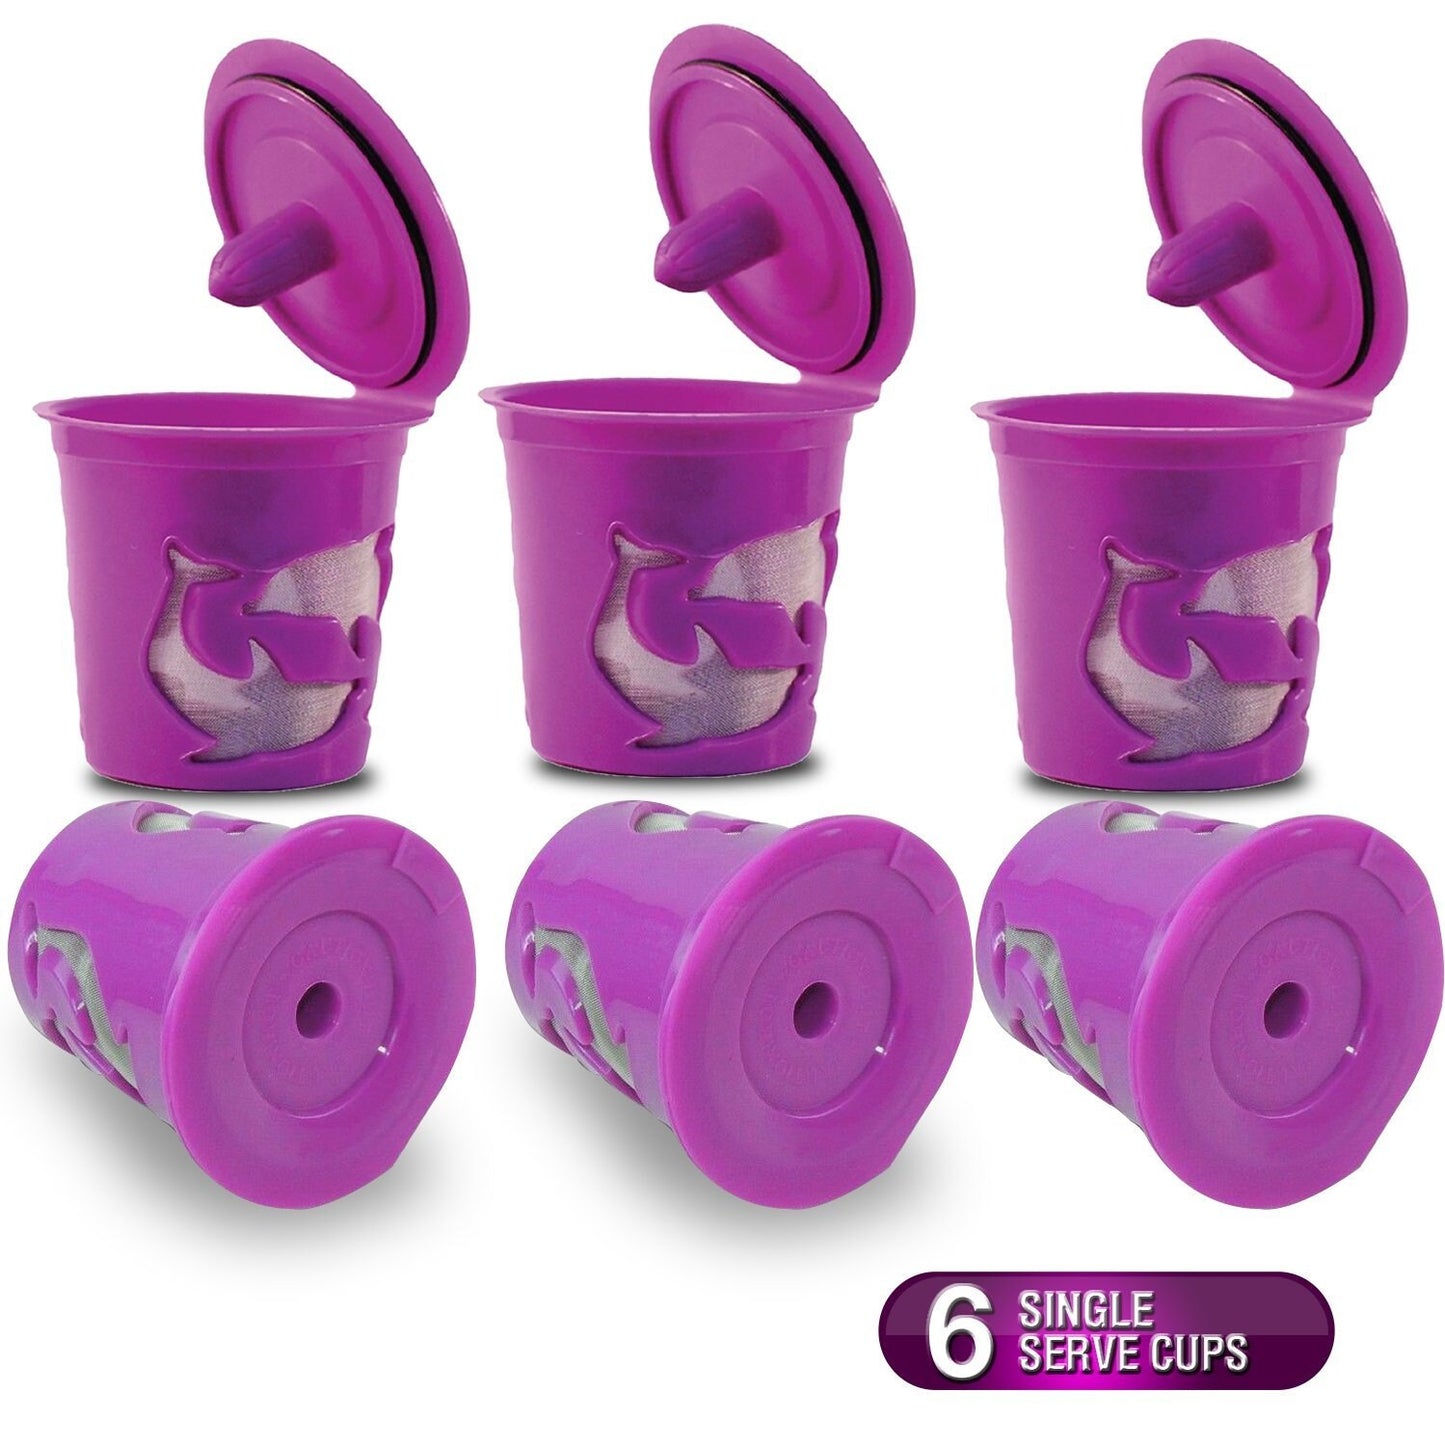 6 - Purple Refillable Reusable Single K-Cups Filter Pod for Keurig Coffee Makers